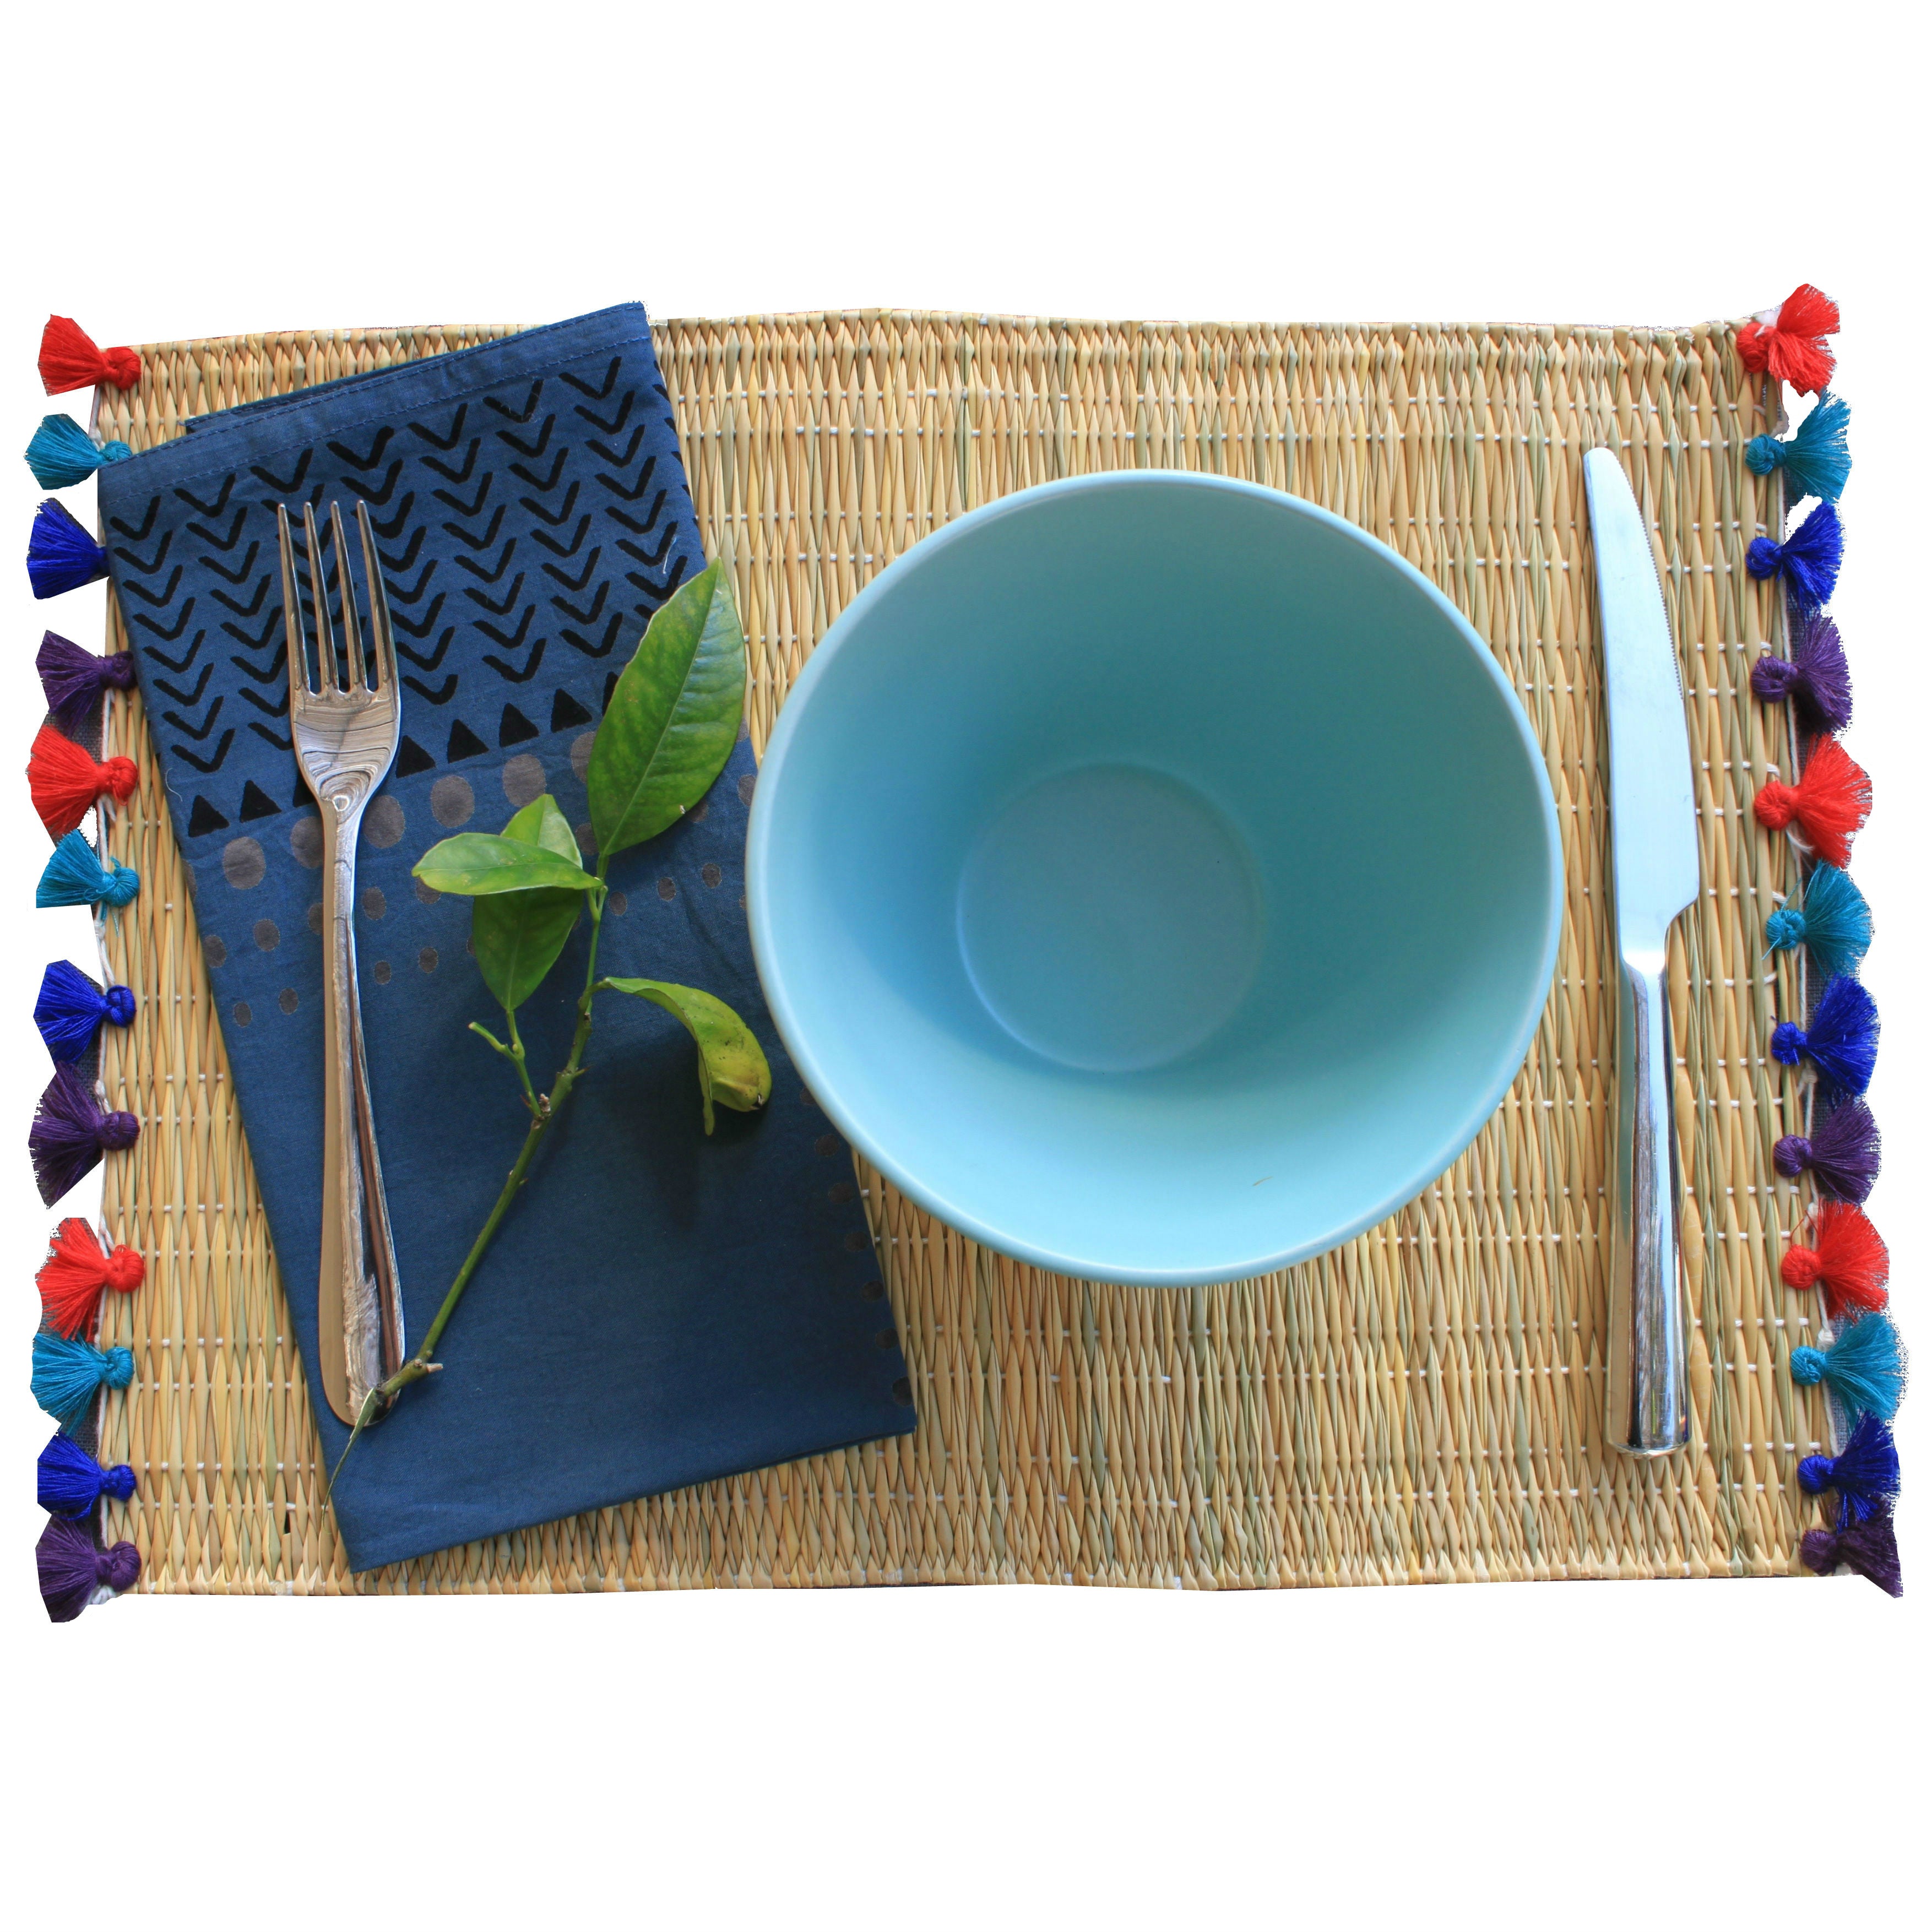 LOLA placemat with tassels JEWEL TONES-SET OF 2